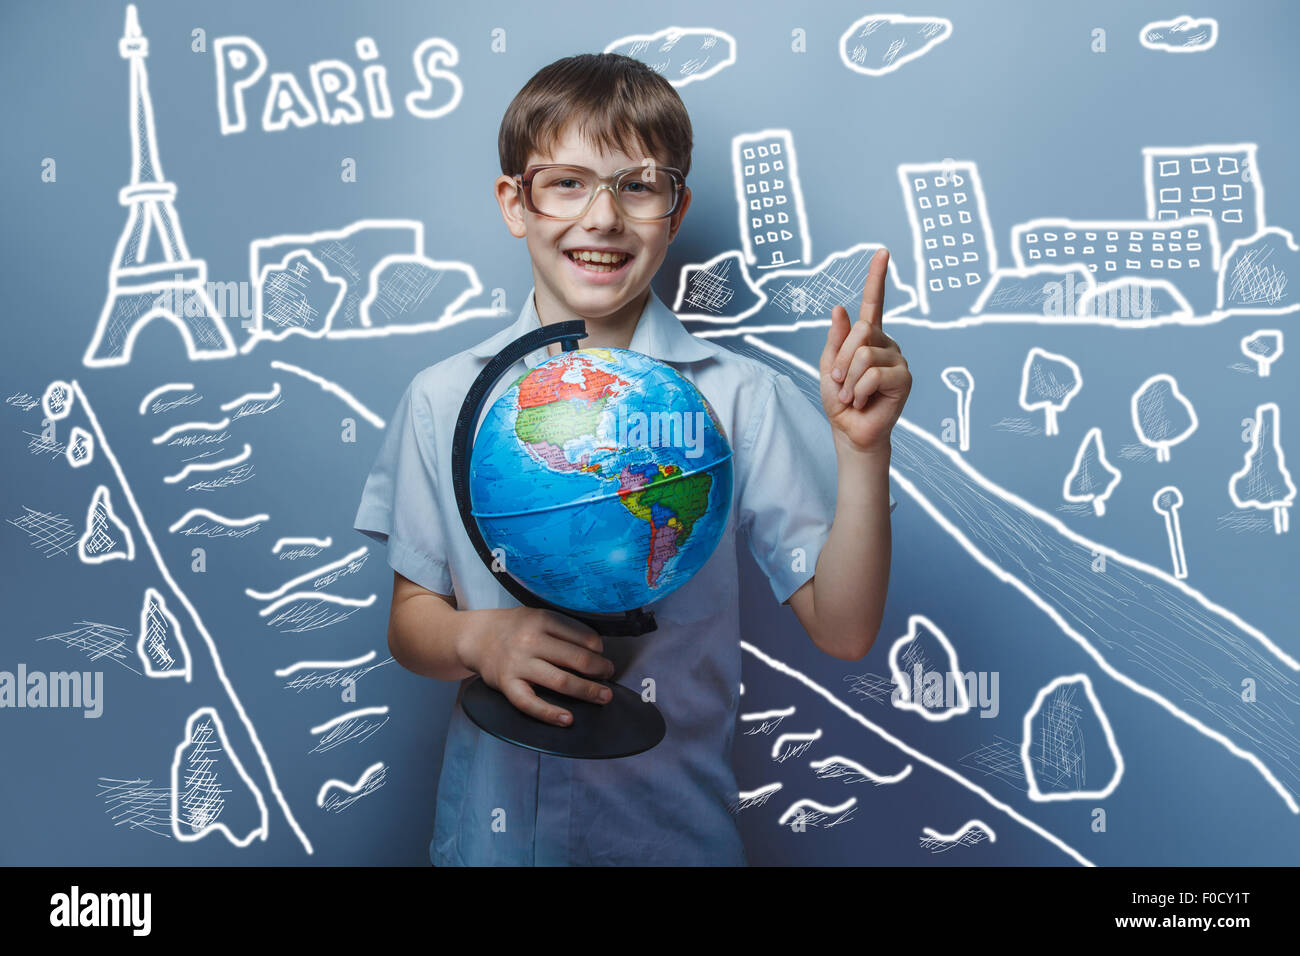 a boy of 10 years of European appearance with glasses holding a globe in hands on a gray  background Stock Photo